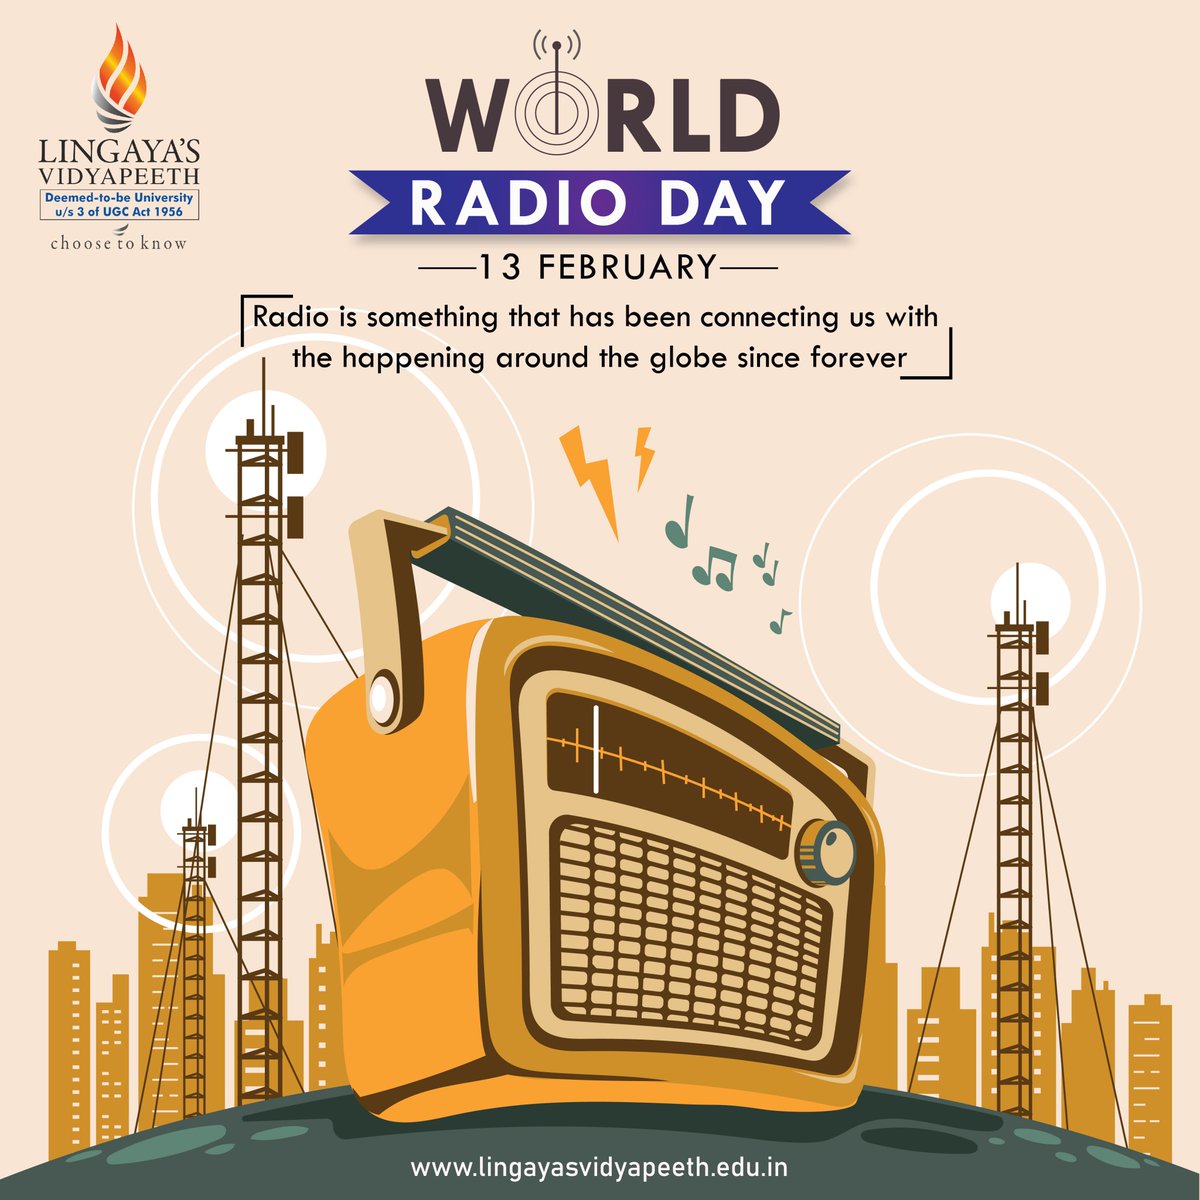 Do you Know?
The first radio programme was broadcast in July 1923 by the Radio Club of Mumbai. Four months later, Calcutta Radio Club also went on air.

 #radioday #worldradioday #awareness #radioclub #information #radio #fm #faridabad #radioufficiale #foryou #broadcast